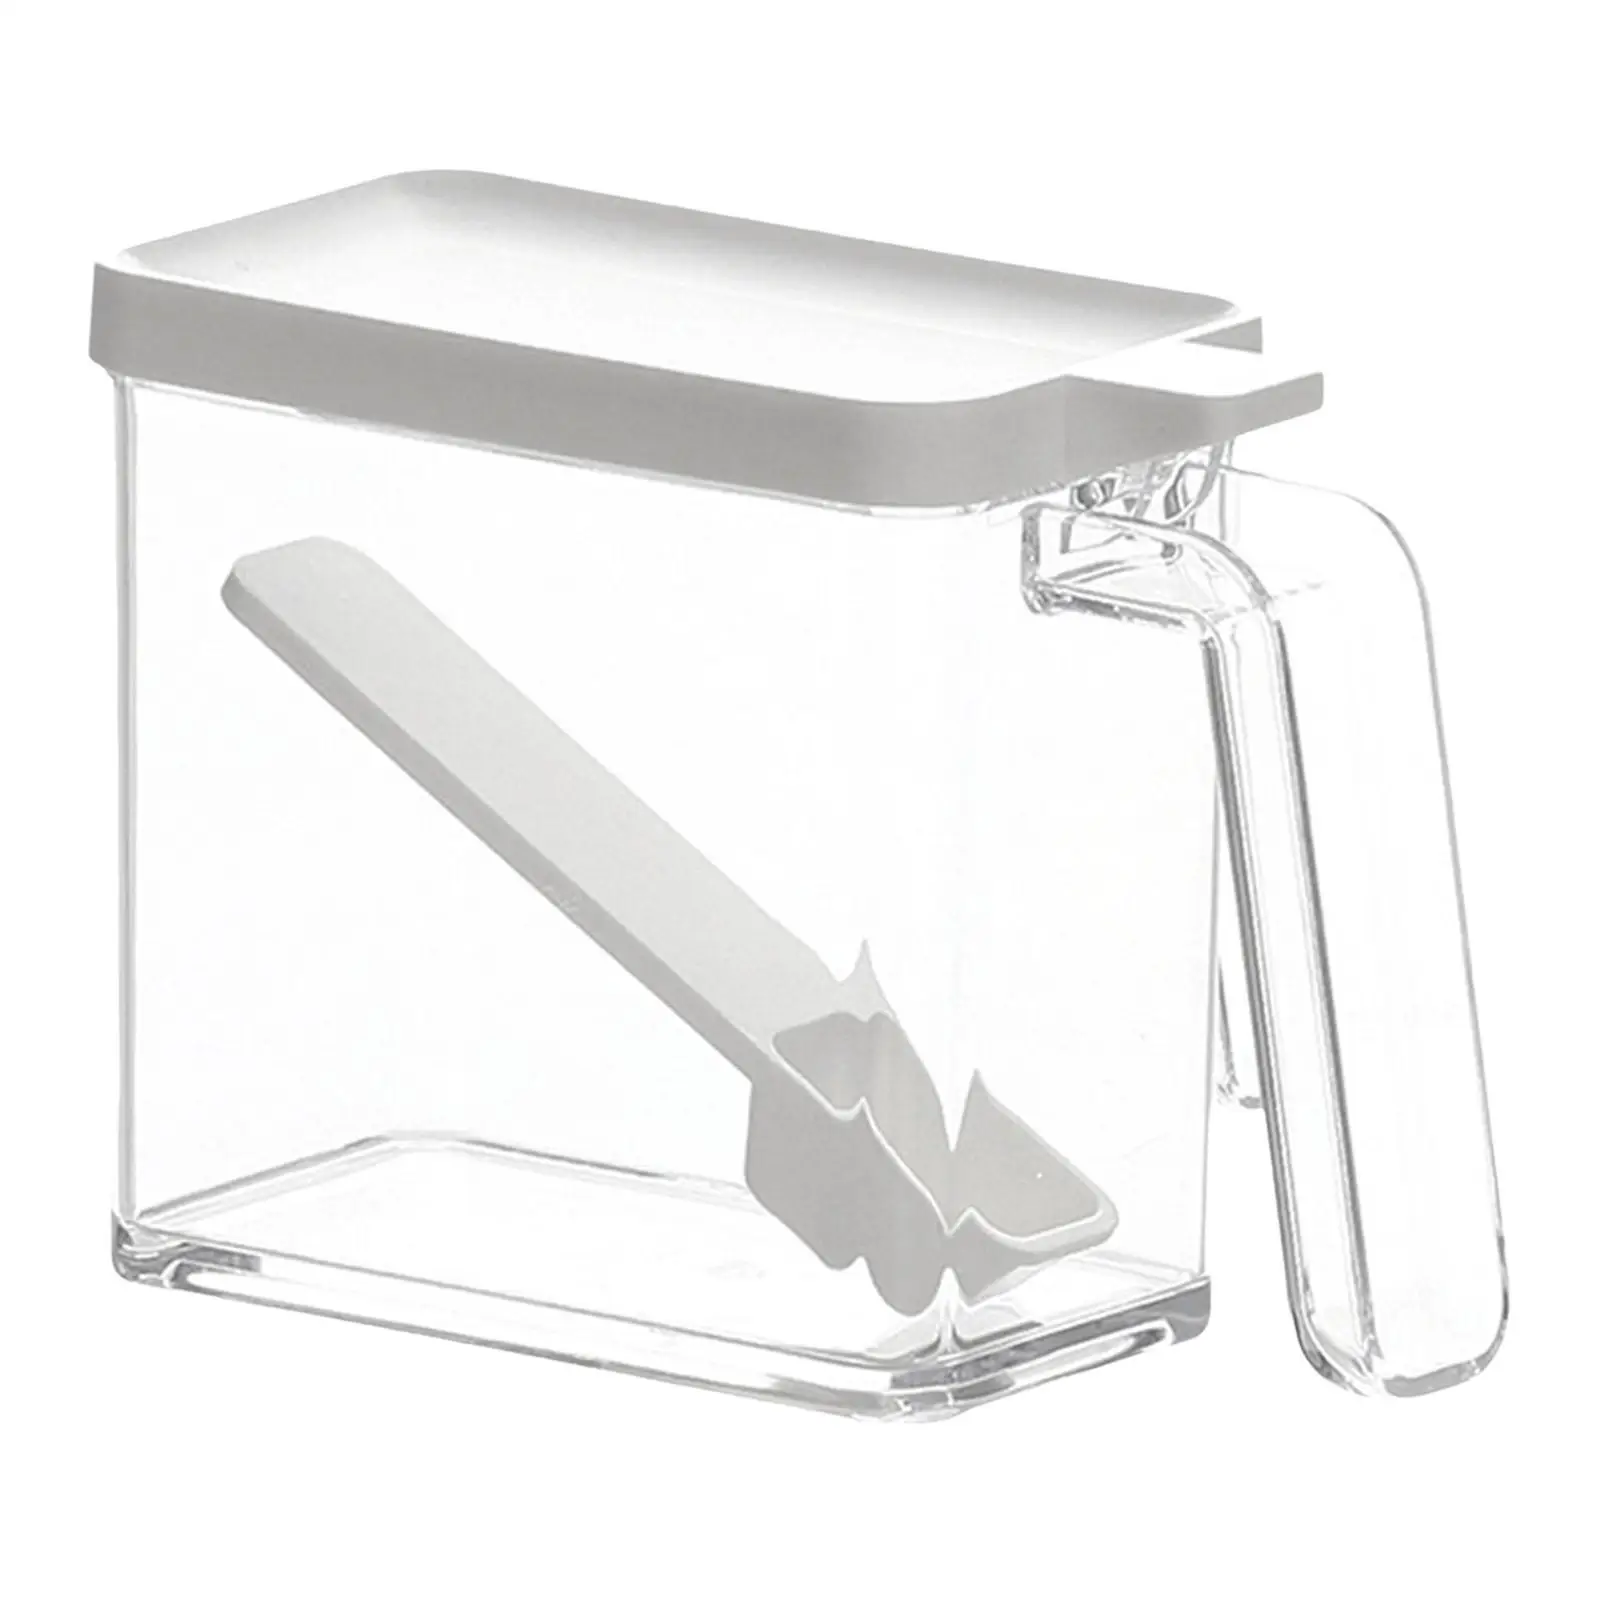 Transparent Salt Container Condiment Box with Serving Spoon for Salt, Pepper, Sugar, Corn Starch and Chicken Broth Powder